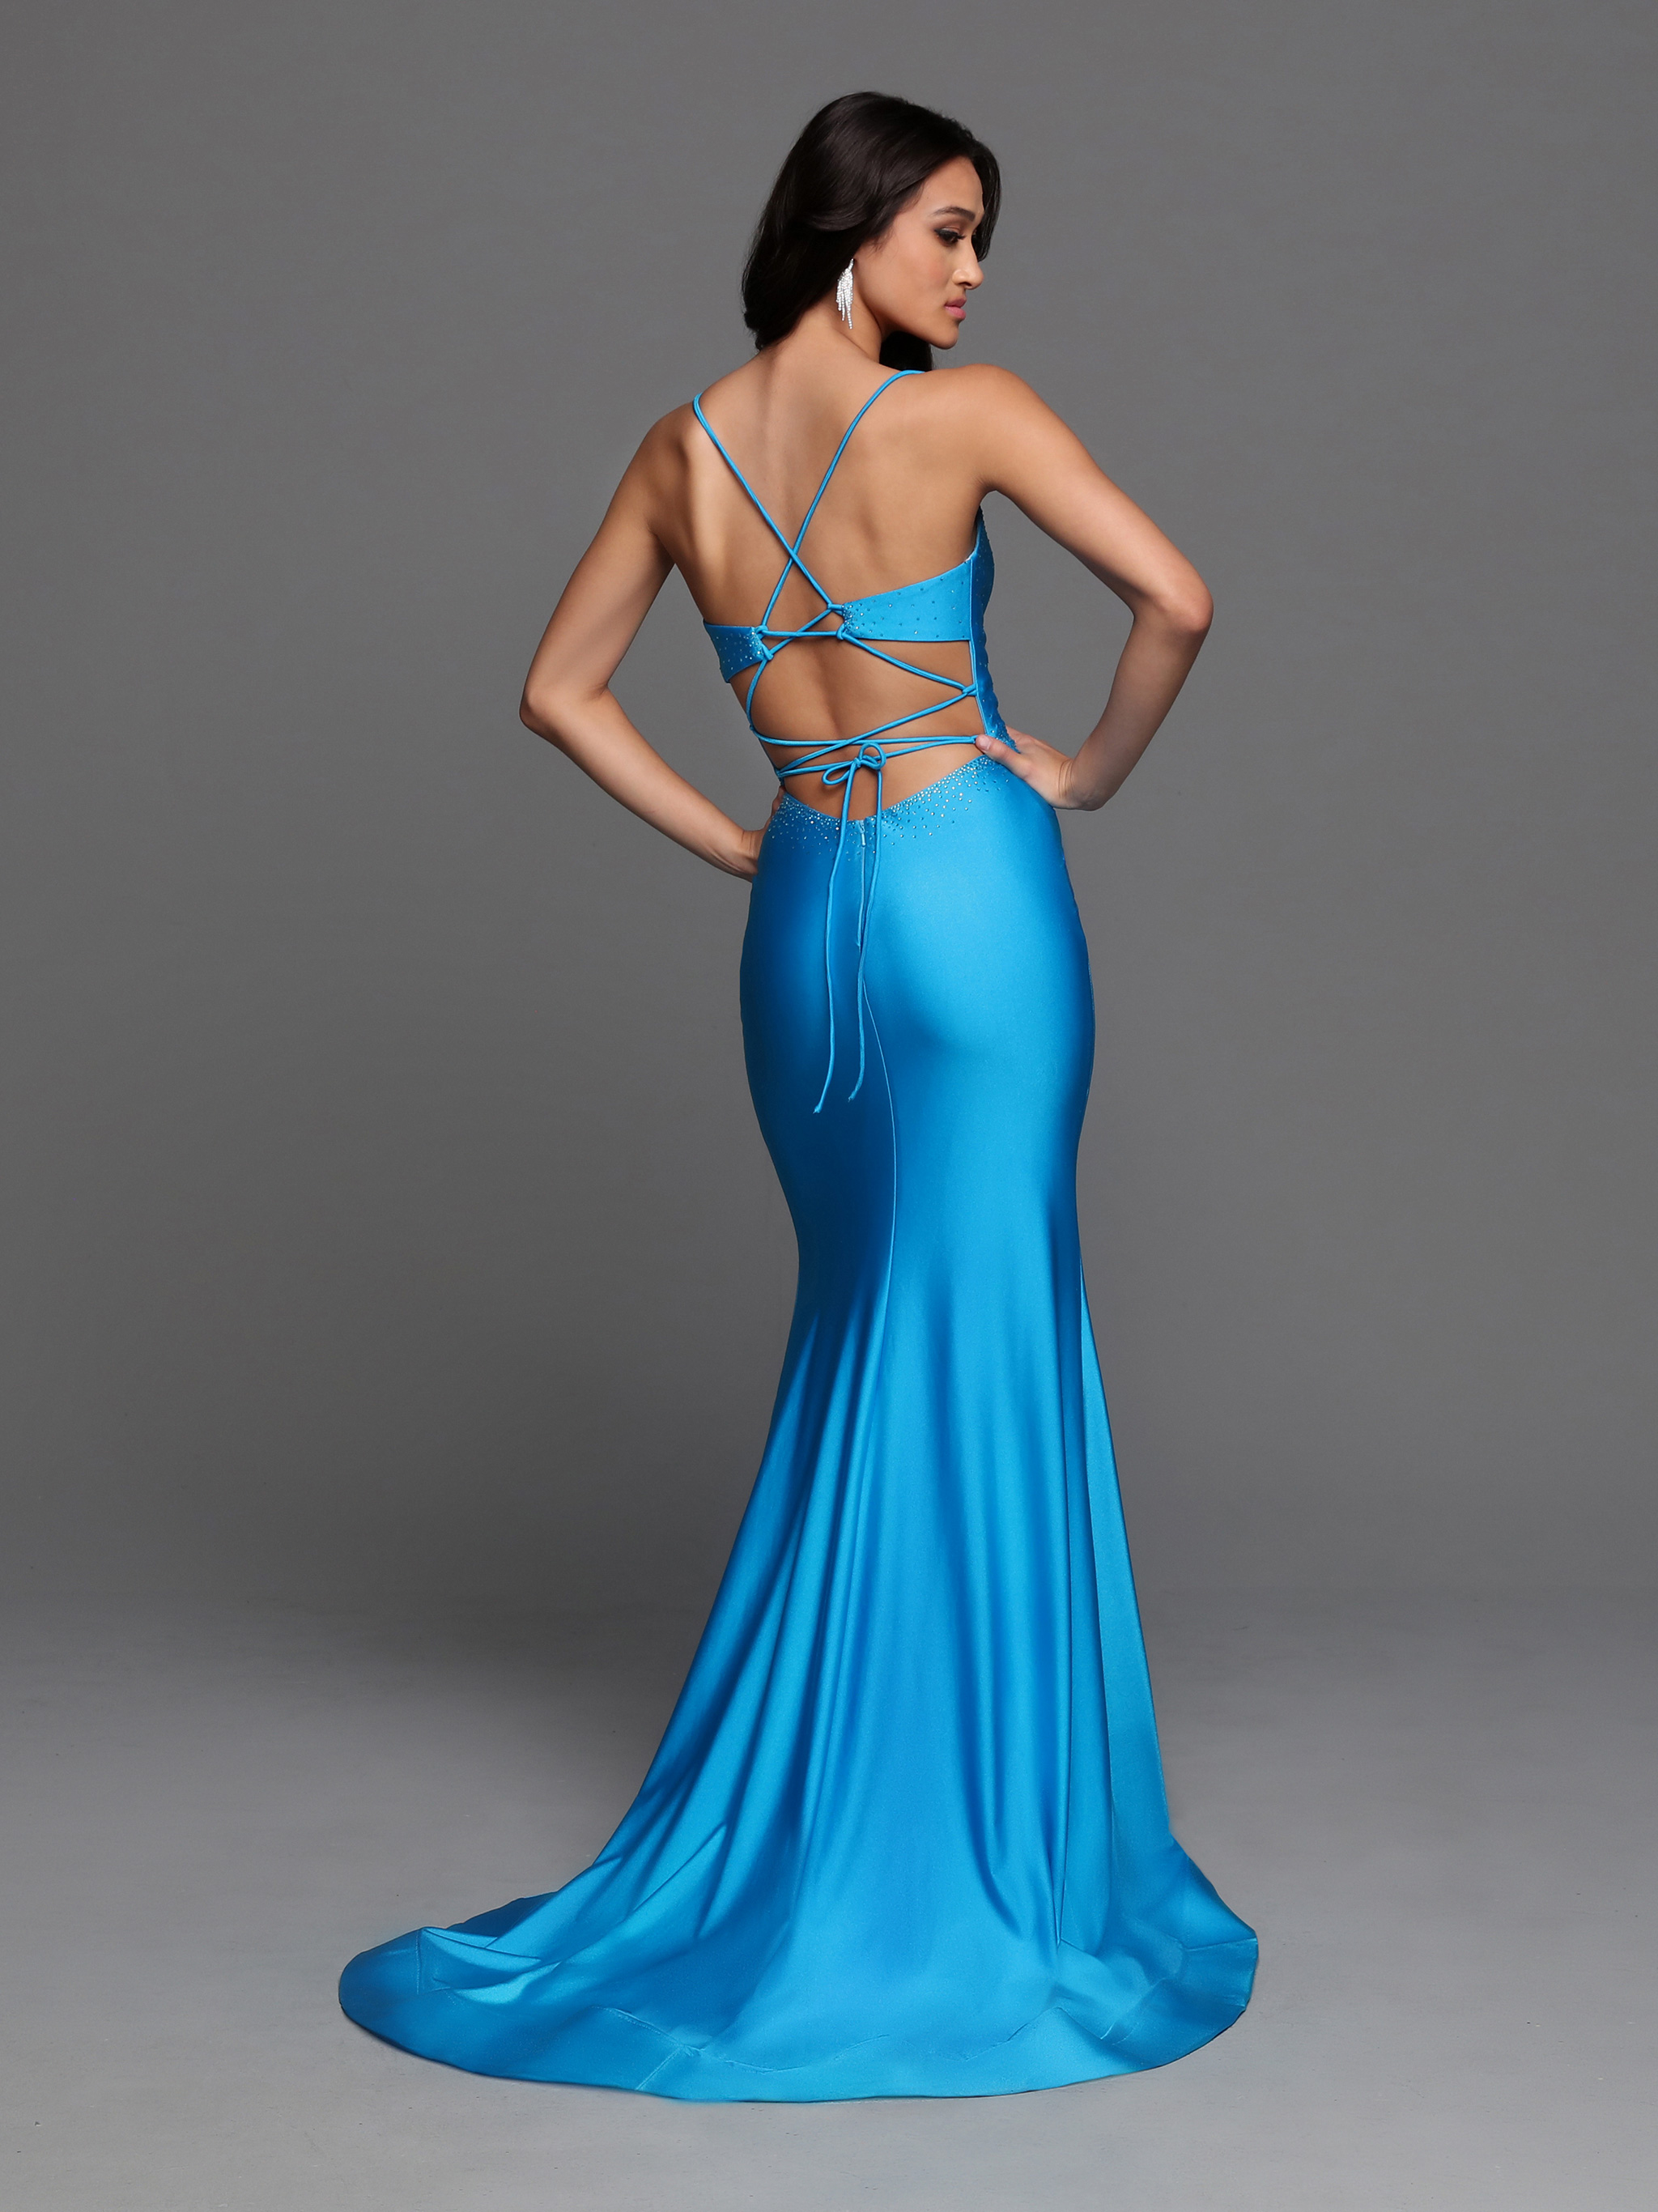 Image showing back view of style #72271